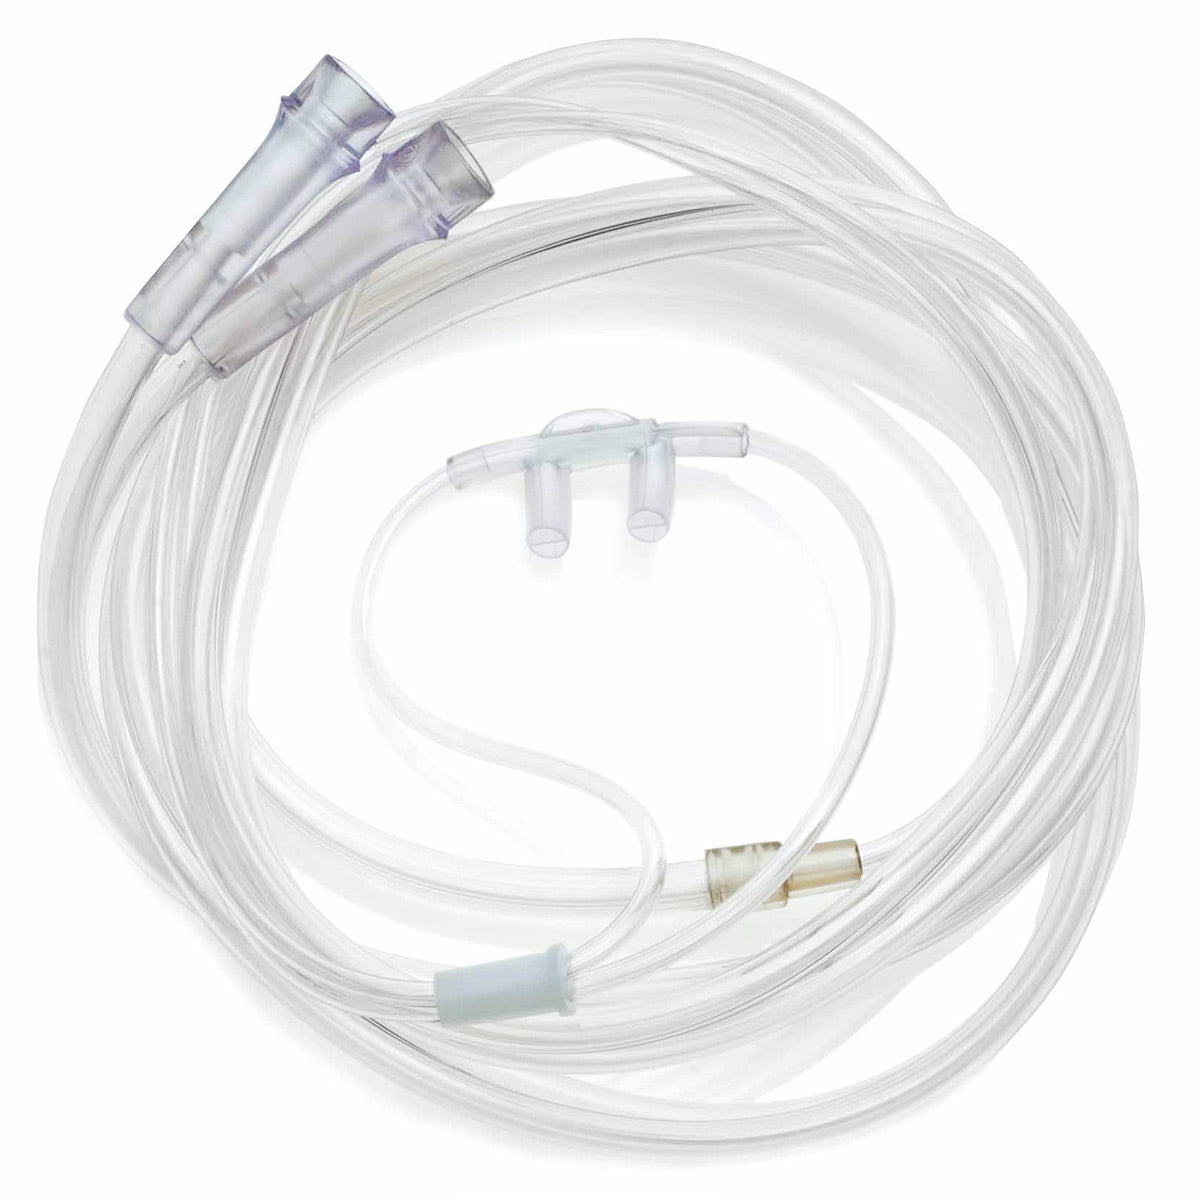 Oxygen Conserving Adult Nasal Cannula with 7 Foot Dual Lumen Supply Tubes